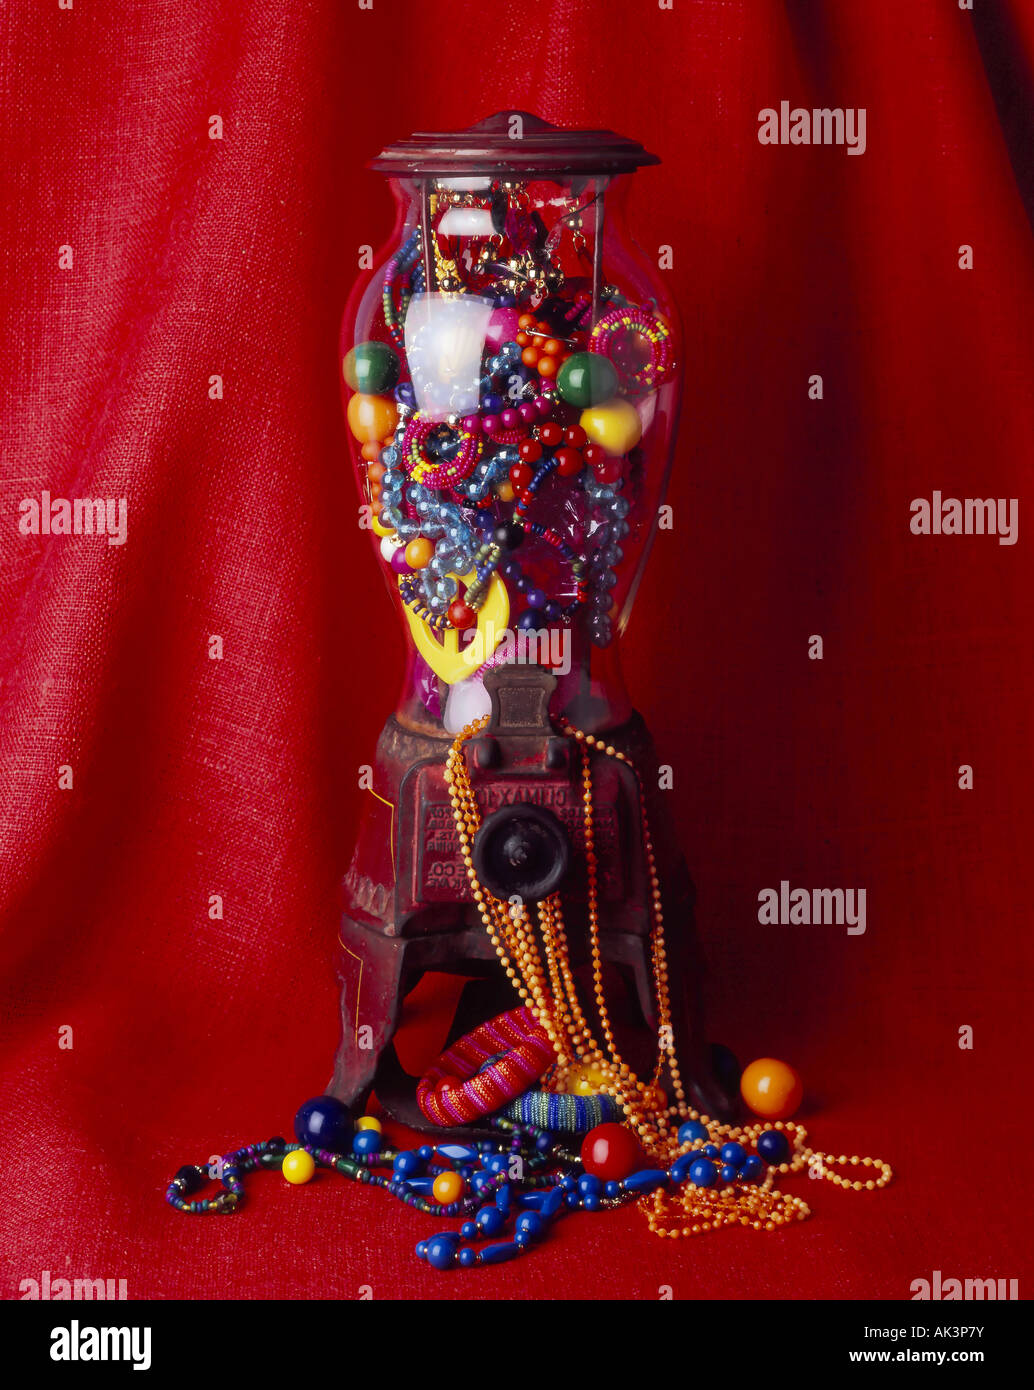 old fashion gum ball machine fill with brightly colored fashion accessories Stock Photo